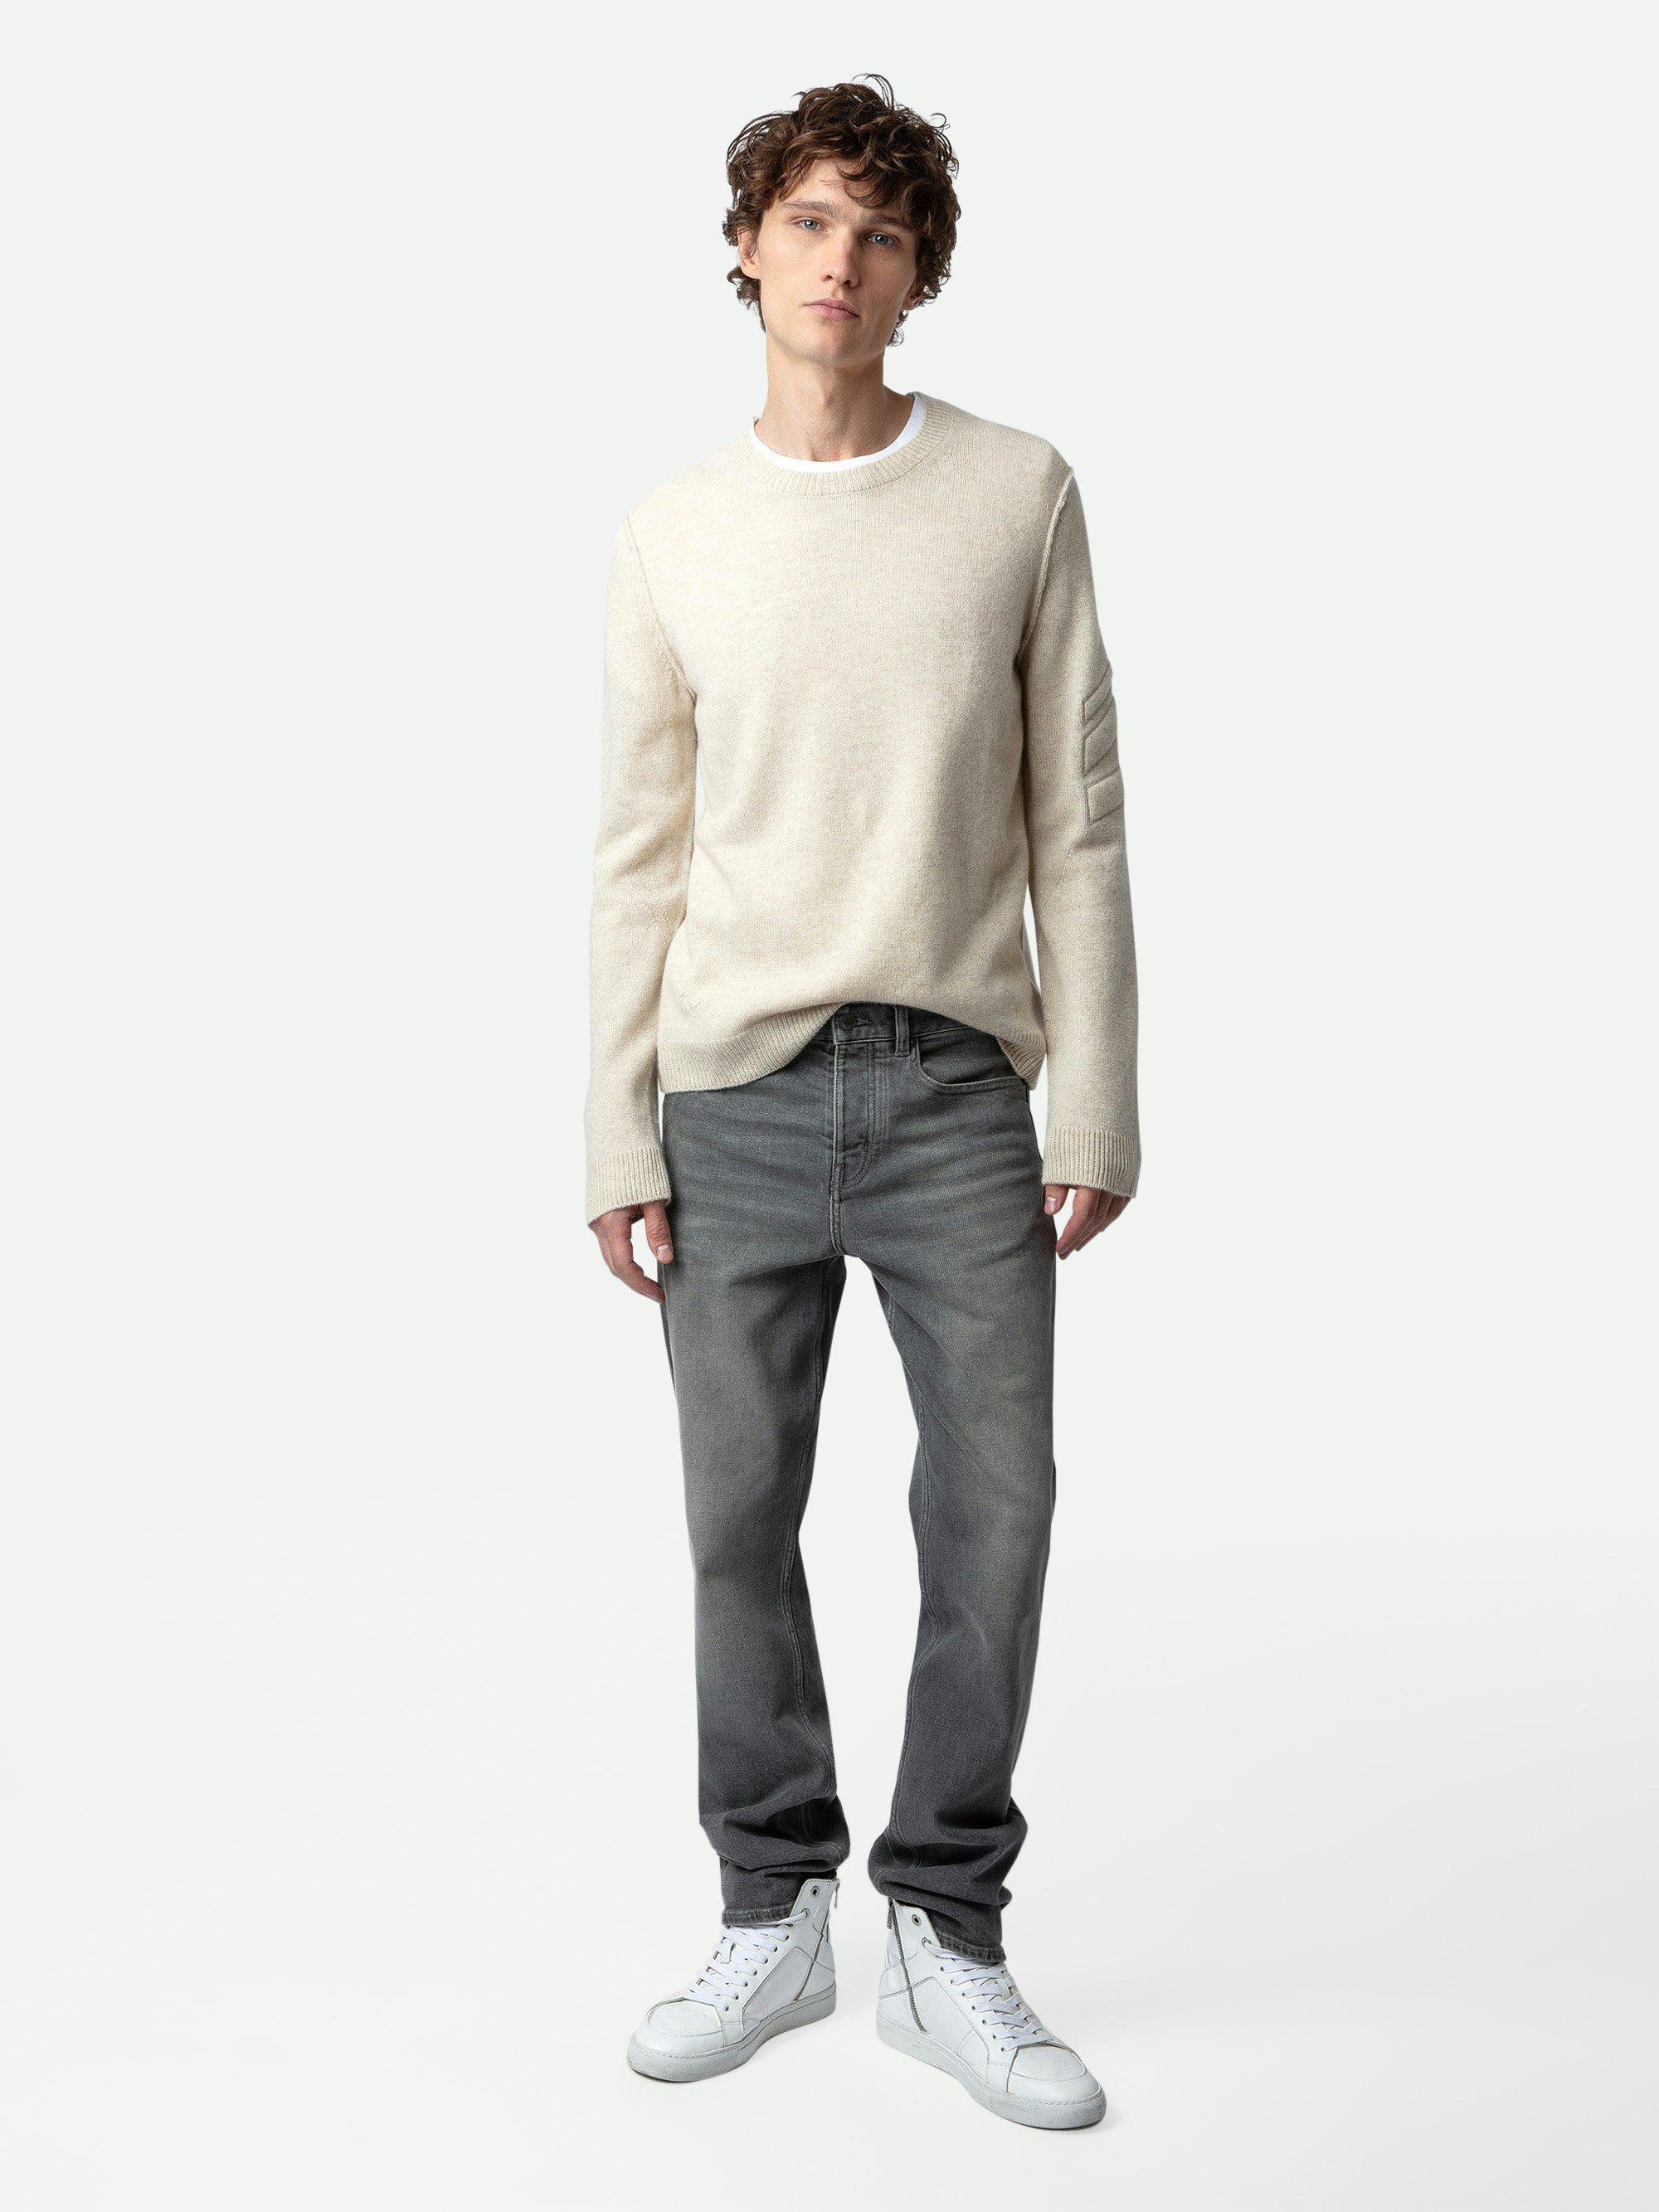 Kennedy Arrow Cashmere Jumper - Ecru 100% cashmere round-neck jumper with arrows on the left sleeve.